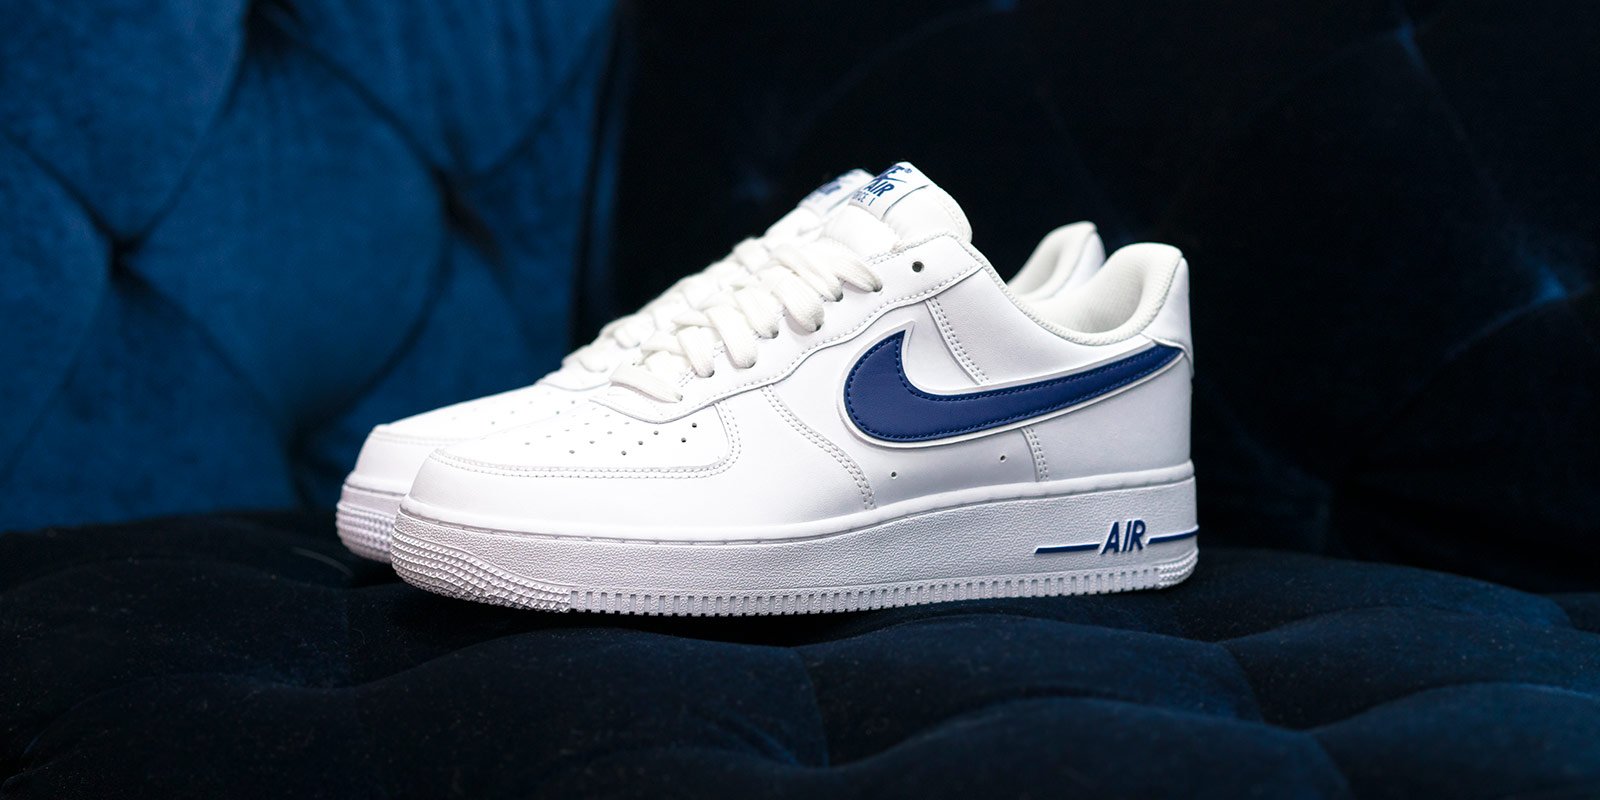 Verdeelstuk periode Raad eens Sizing Guide: How Does The Nike Air Force 1 Fit? | The Retro Insider